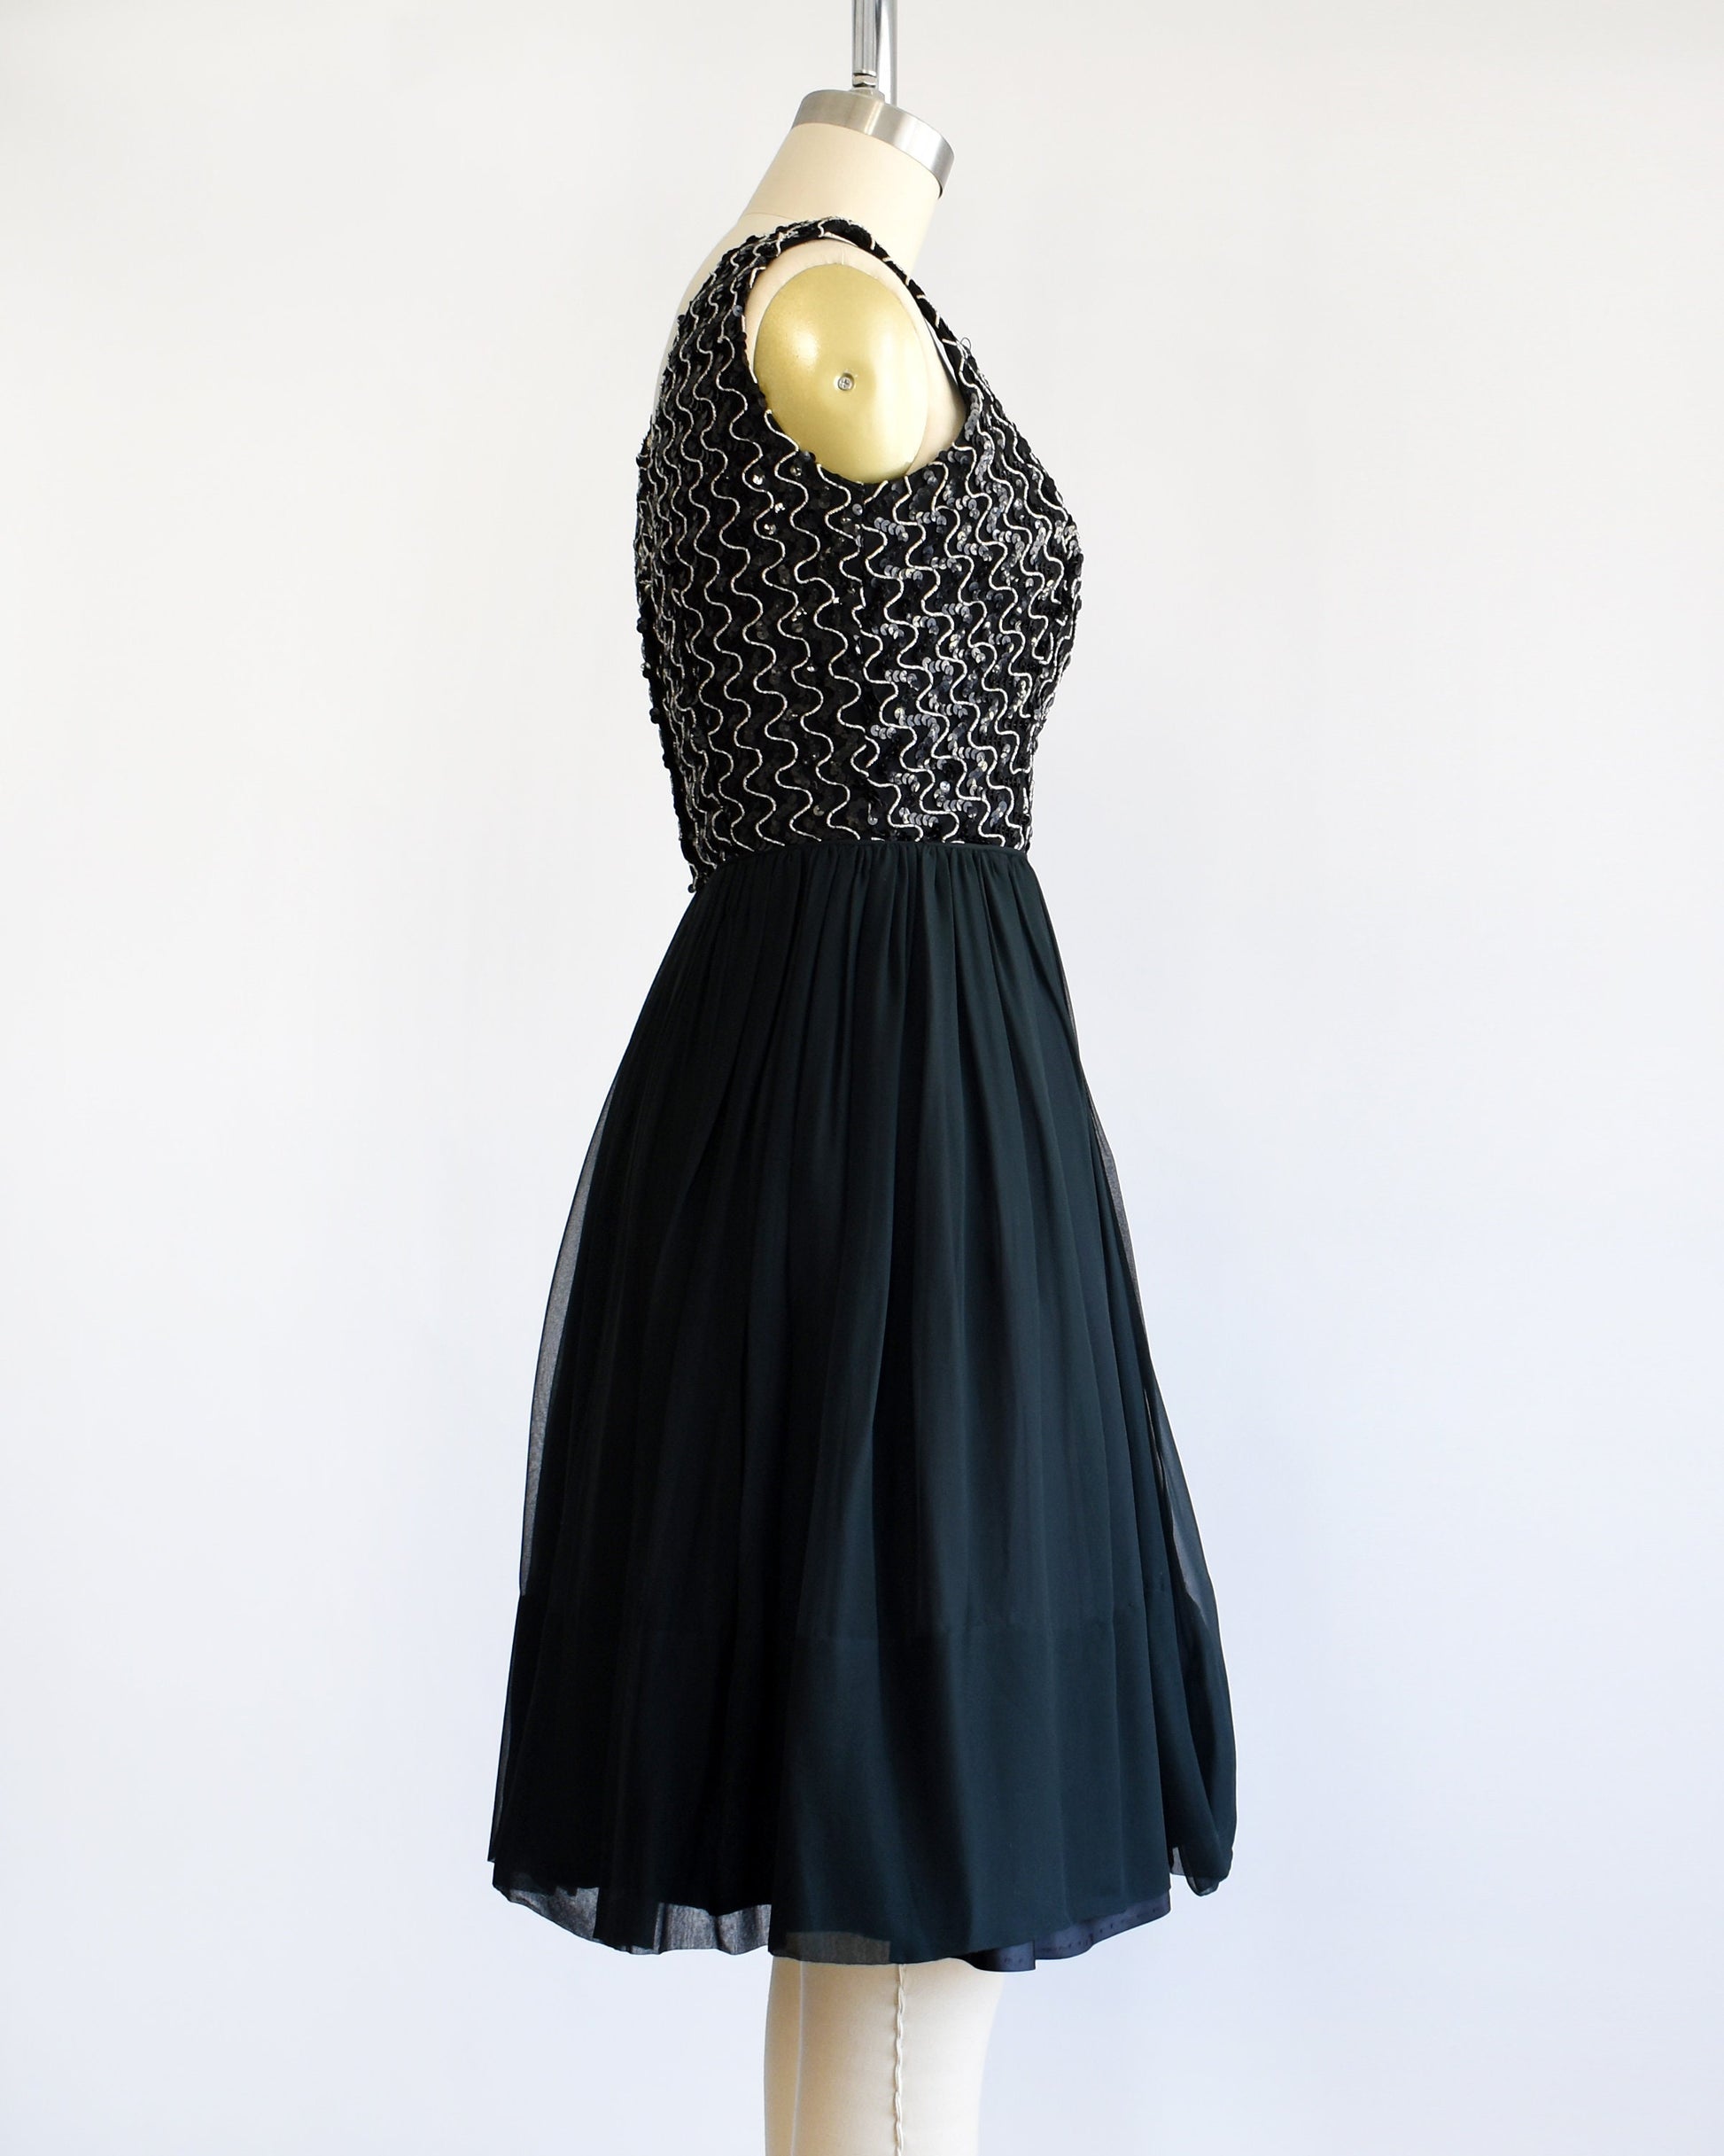 Side view of a vintage 60s dress with a black sequin bodice with silver vertical squiggles. The skirt is a layered with black chiffon on top. The dress is modeled on a dress form.